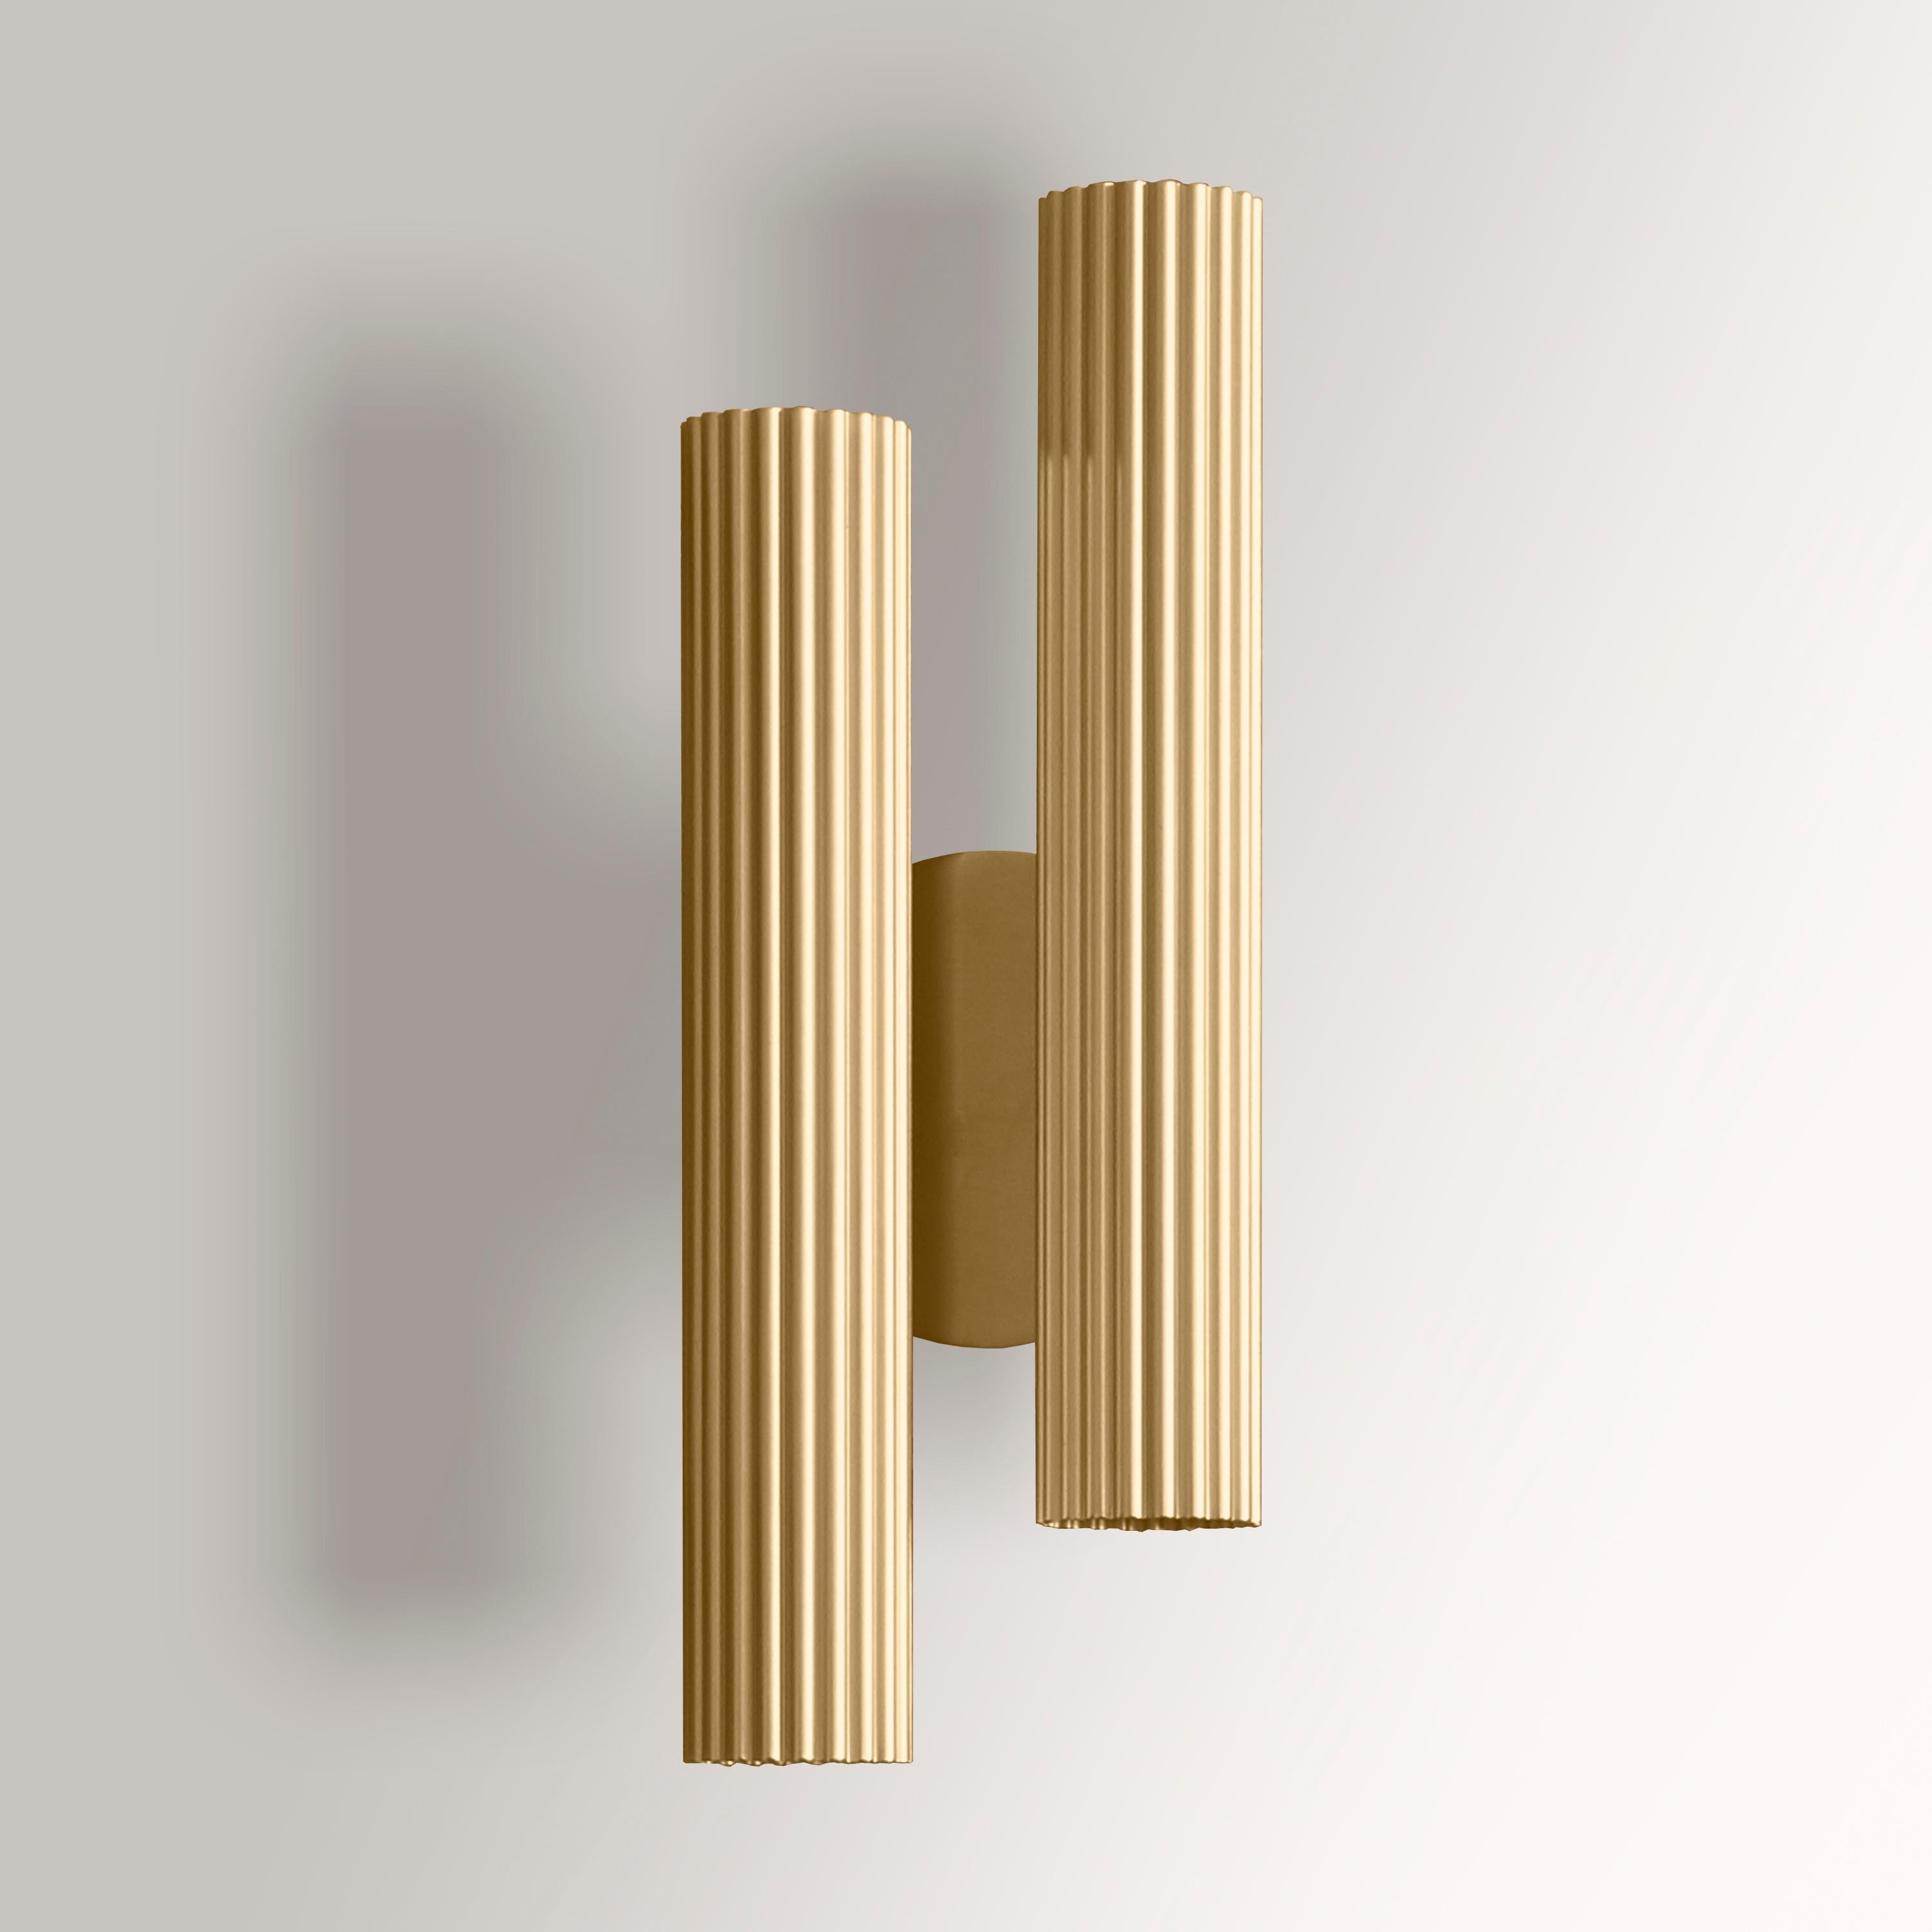 Lustrin double wall lamp by Luce Tu
Dimensions: 35 x 13 cm
Materials: Brass 


LUCE TU is the story of two siblings in love with Milan, their hometown.
With the aim of enhancing the historical artisan tradition of the city without losing its